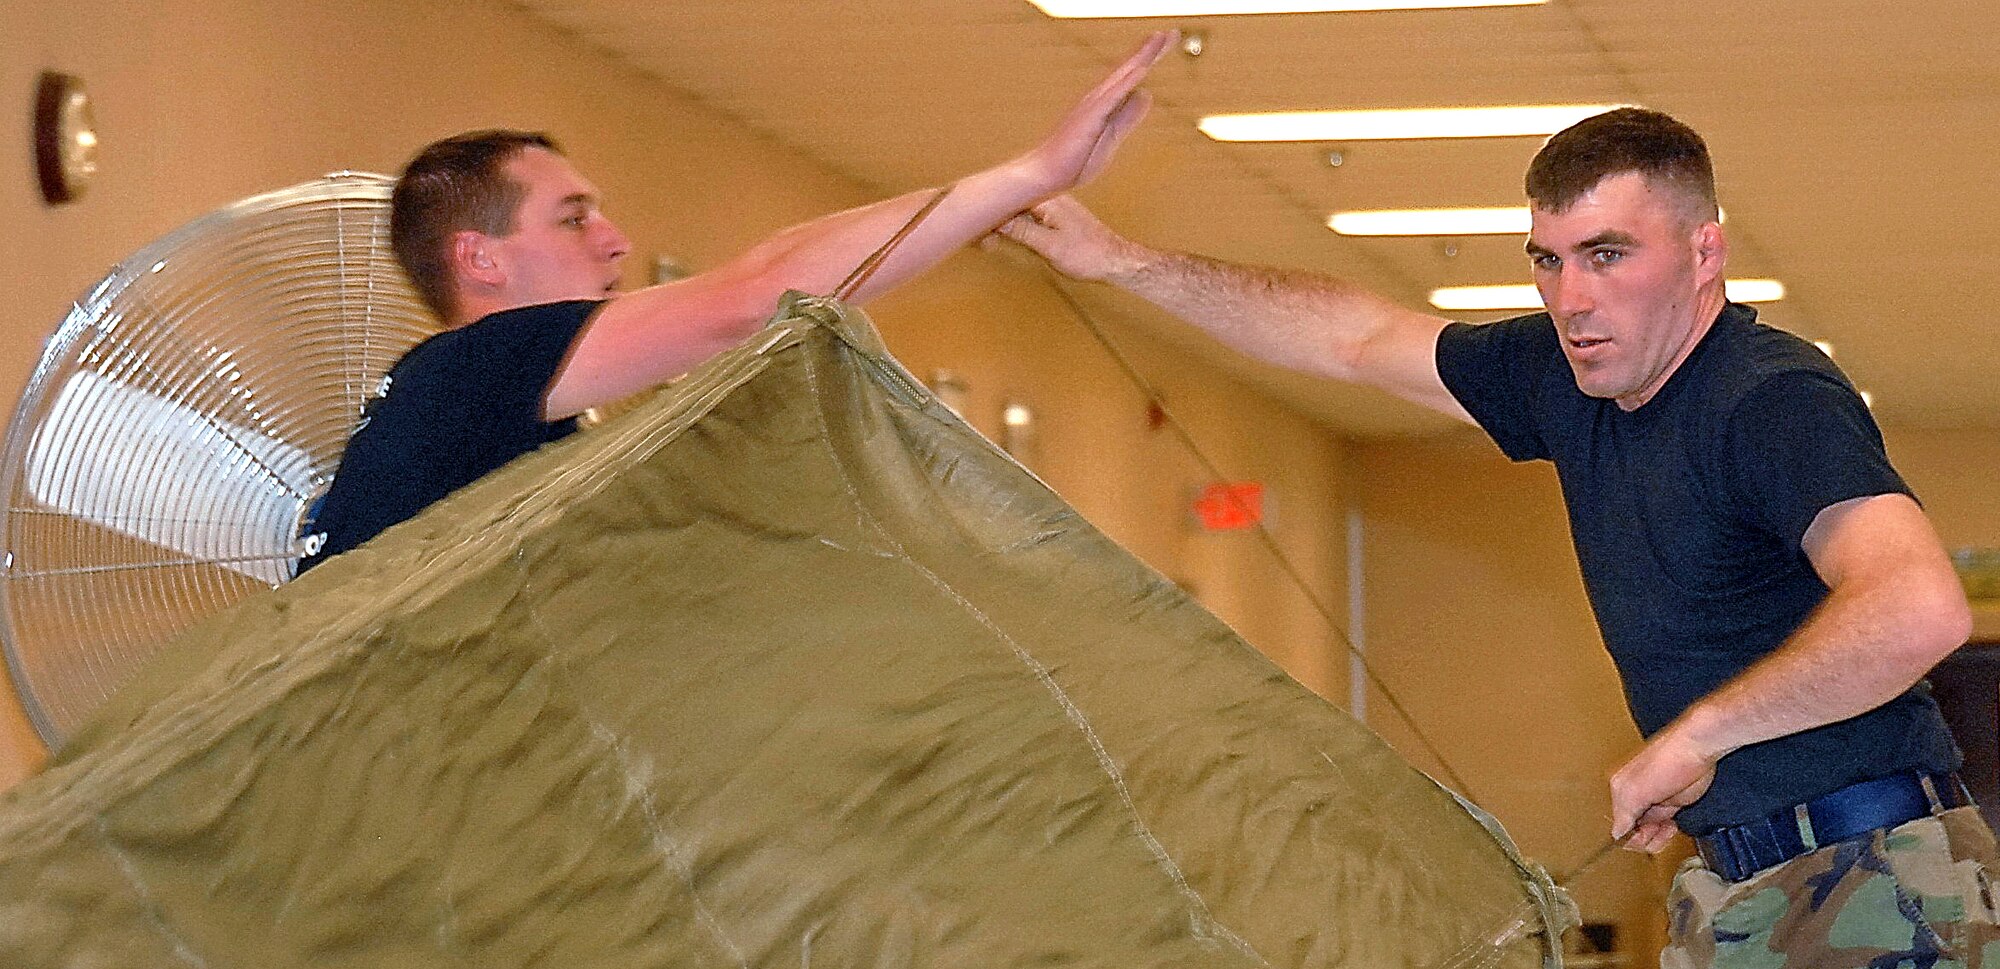 Staff Sgt. Ross McCormick and Airman 1st Class Ryan Stoks prepare a parachute for folding. Airman Stoks says he learned to become a strong leader and individual while wrestling in high school and college, which helps him in the Air Force. (U.S. Air Force photo by Laurence Zankowski)